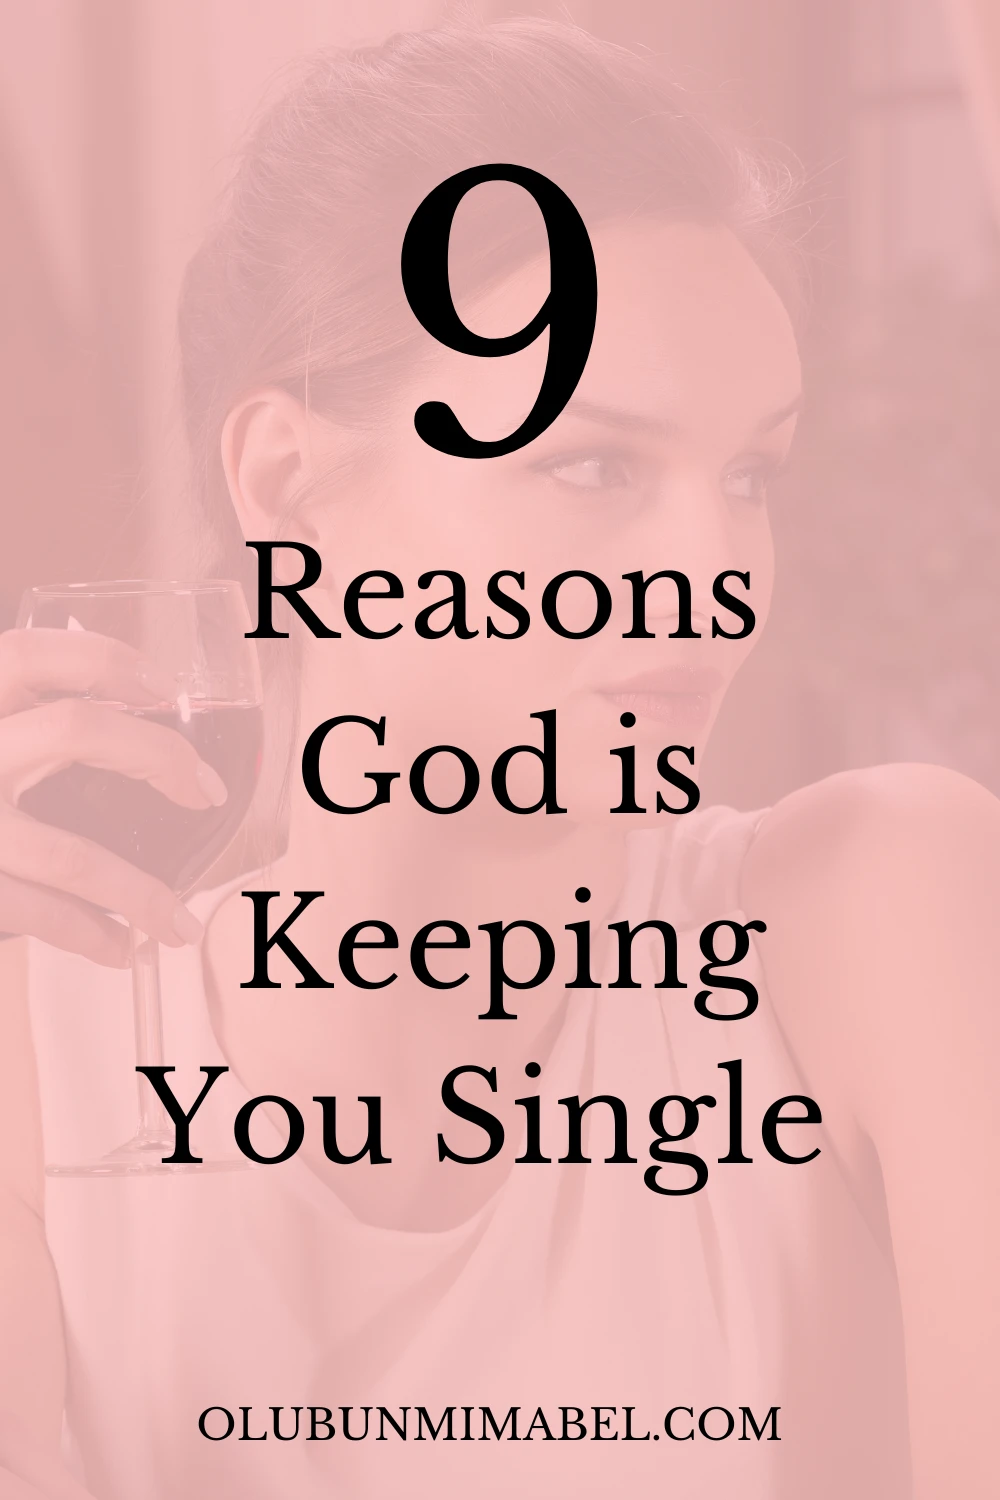 Why is God Keeping Me Single?